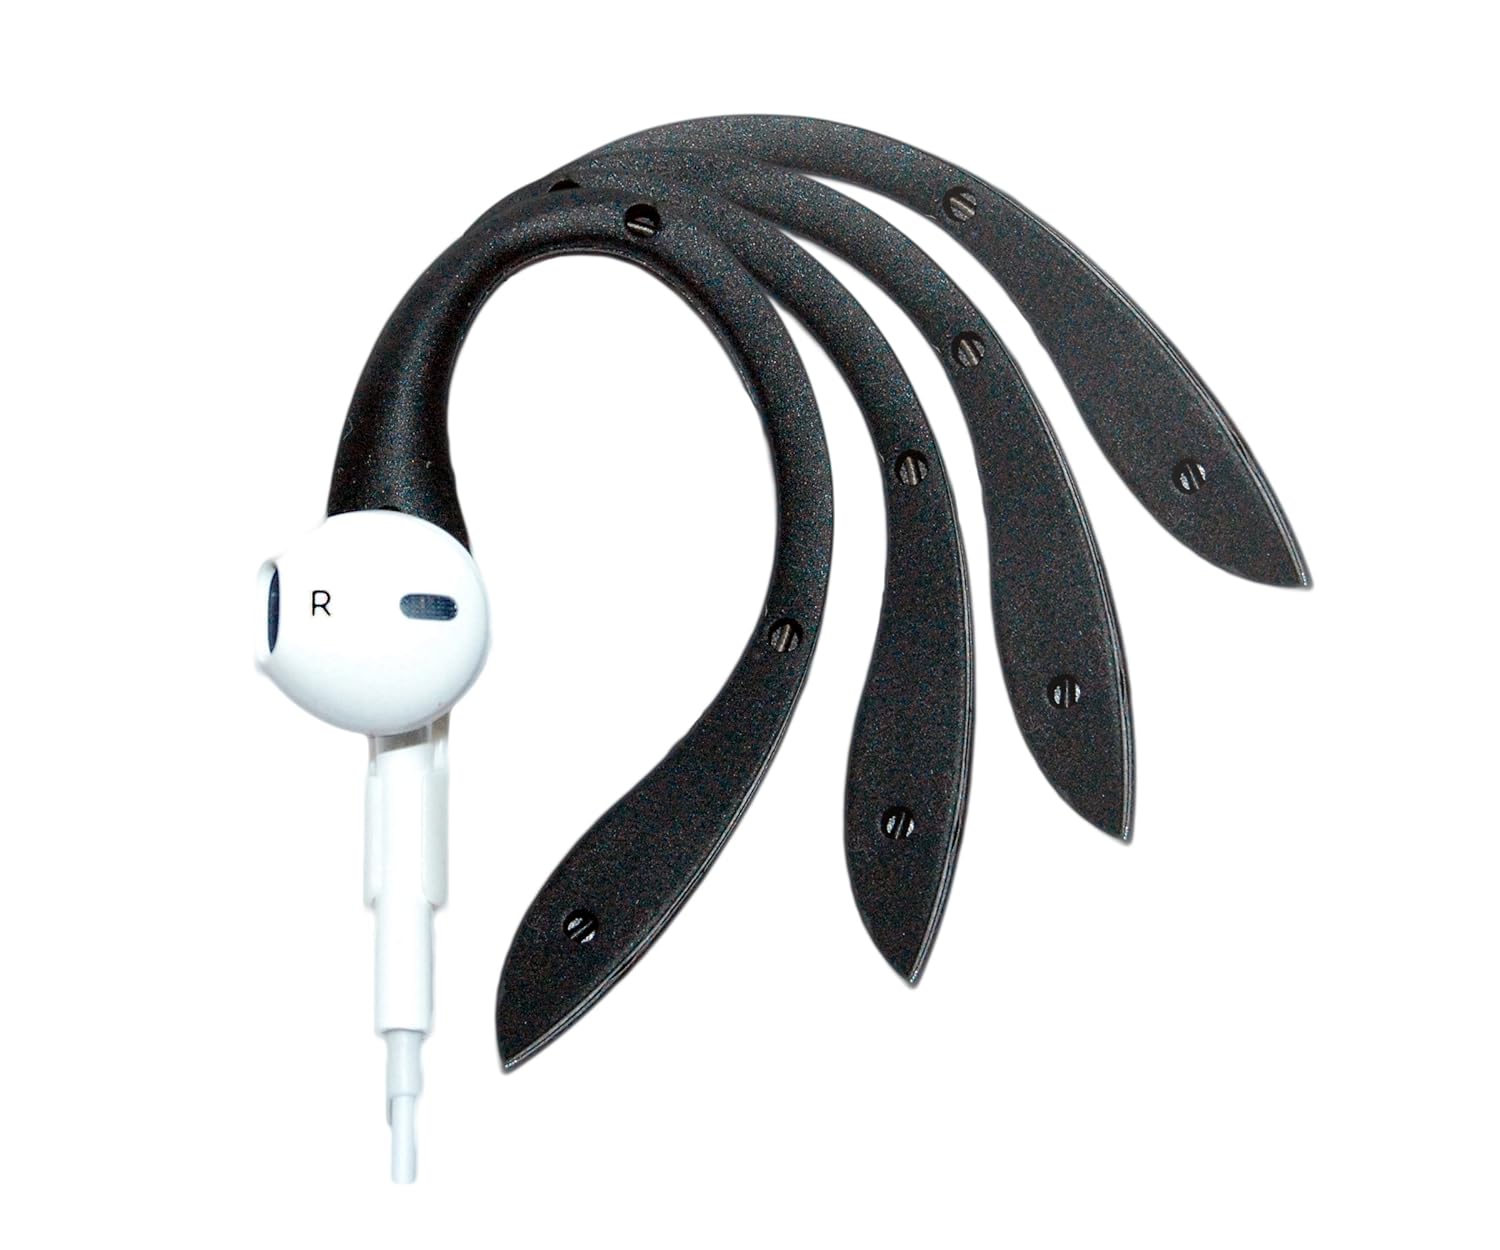 EARBUDi FLEX - Clips on and off Your Apple iPhone wired EarPods | Bends for Amazing Custom Hold on your Ear | Designed for your wired EarPods that come free with the latest iPhone models | (Black)